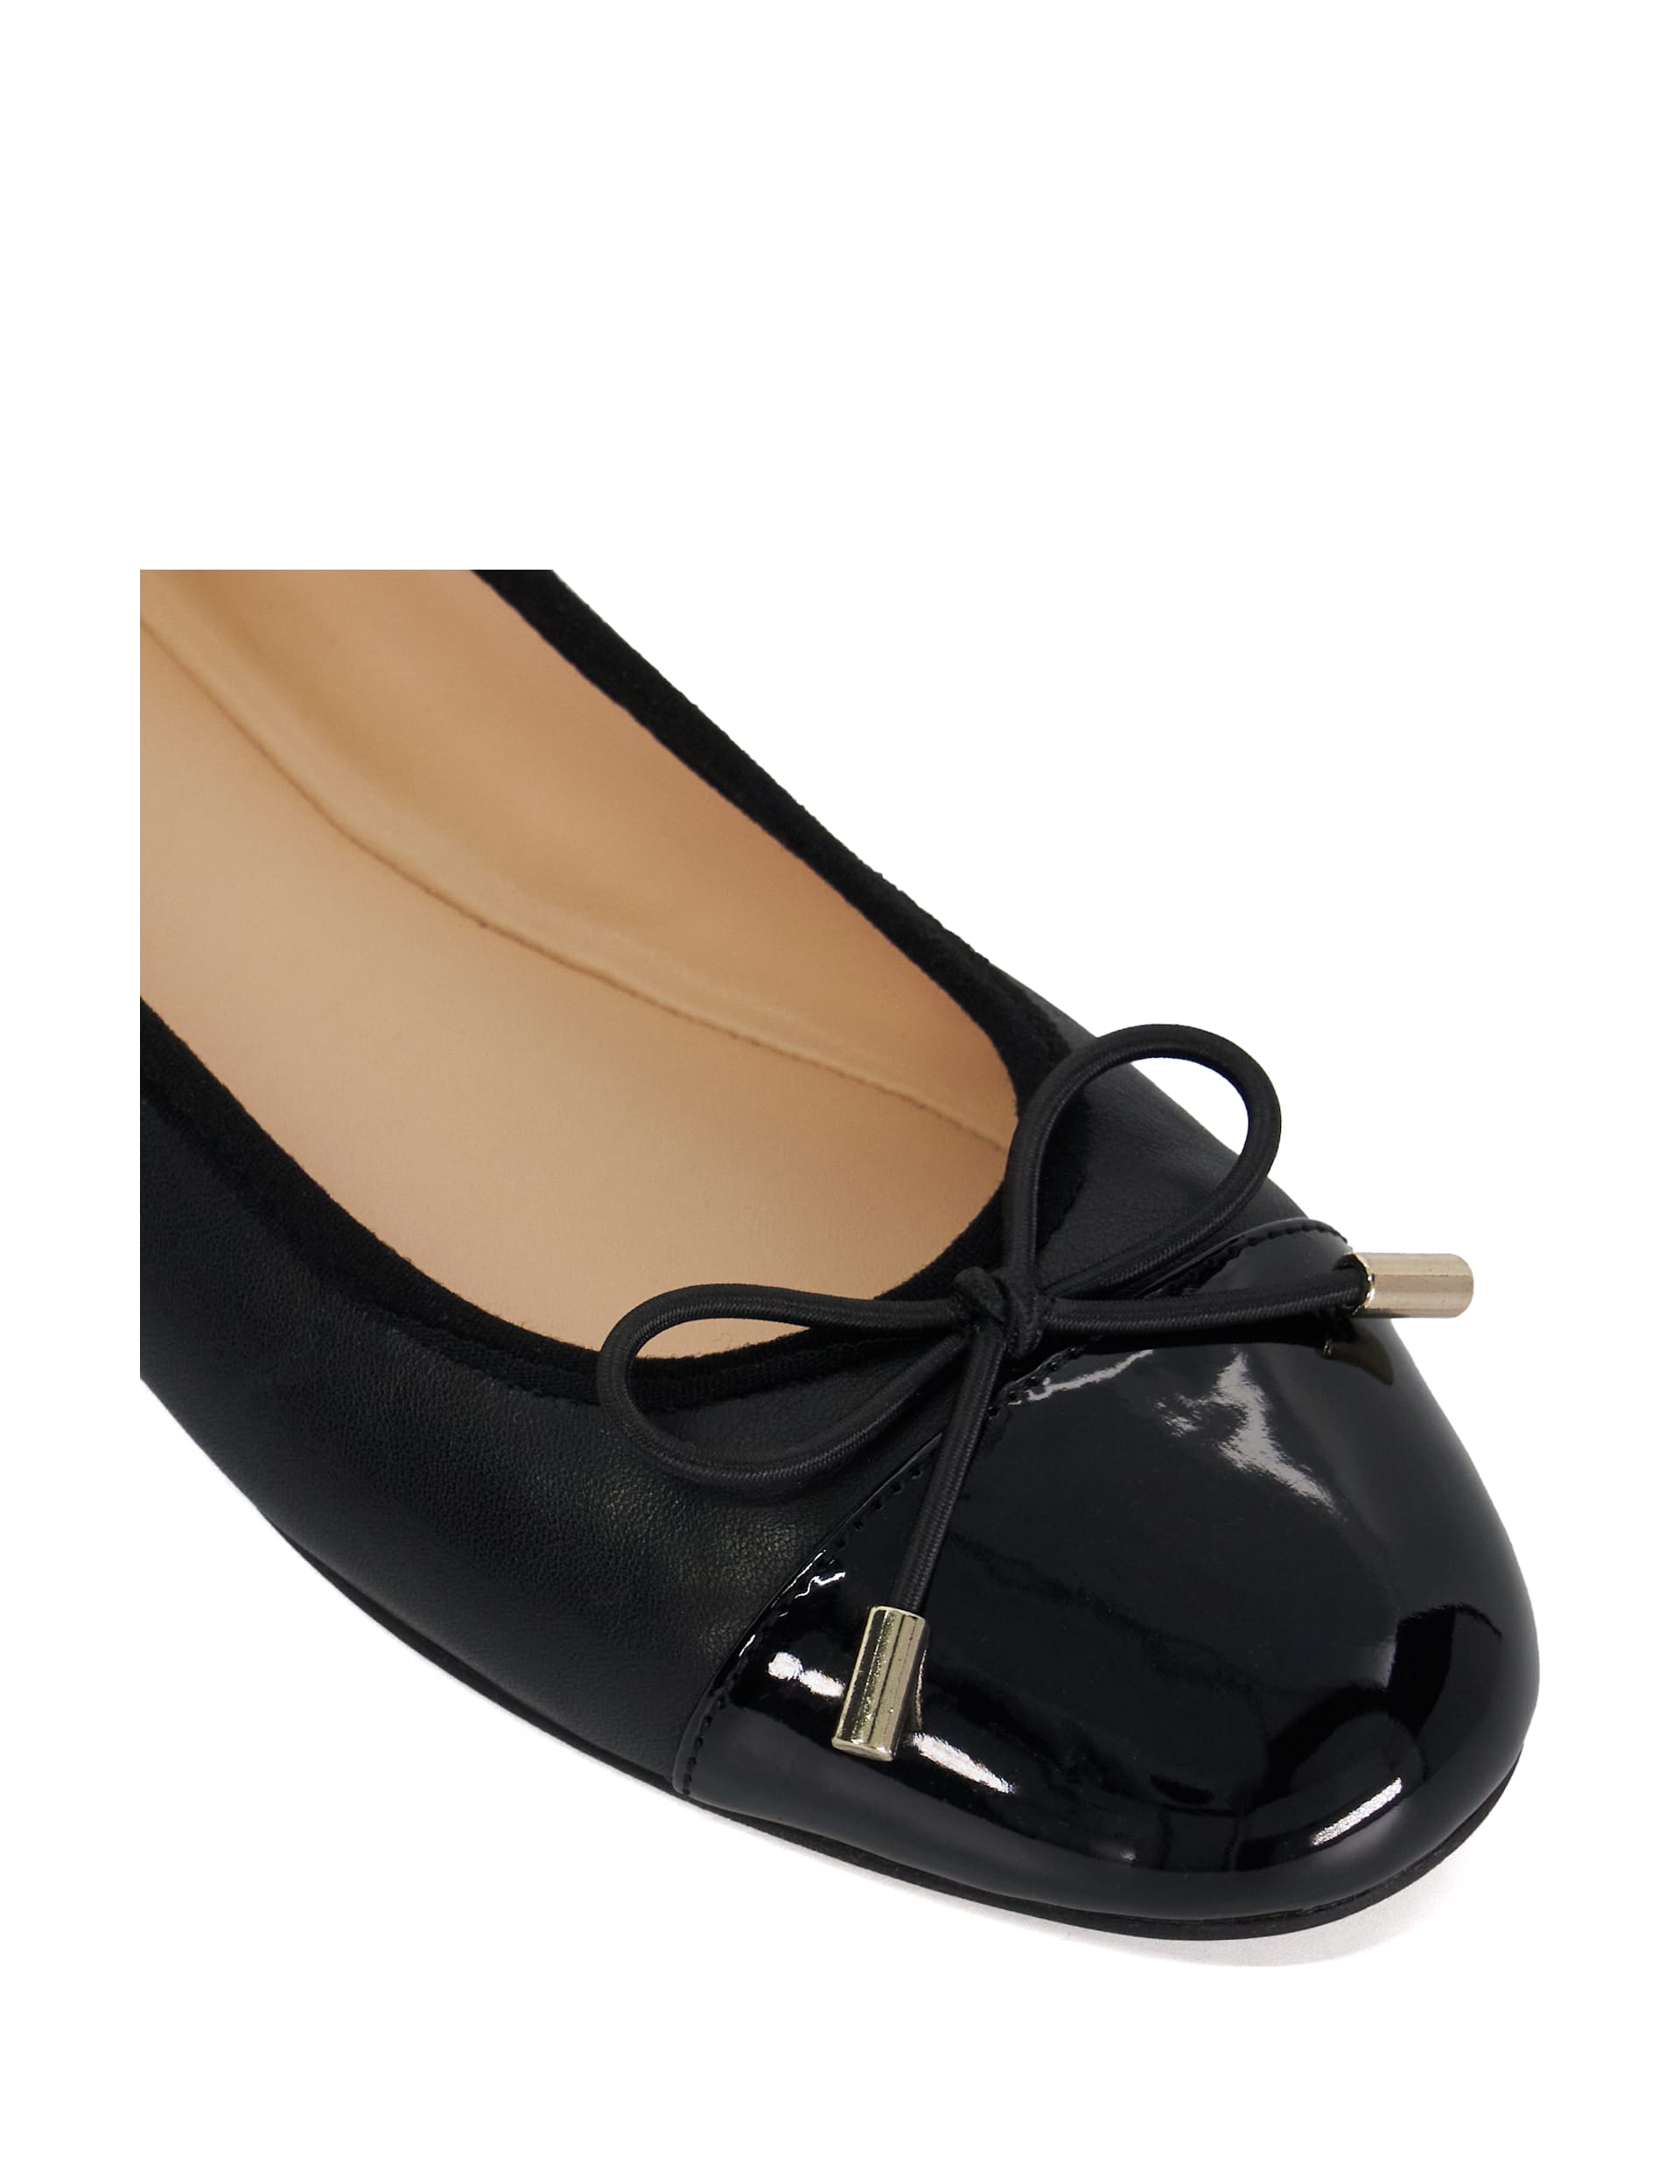 Leather Flat Ballet Pumps 5 of 5